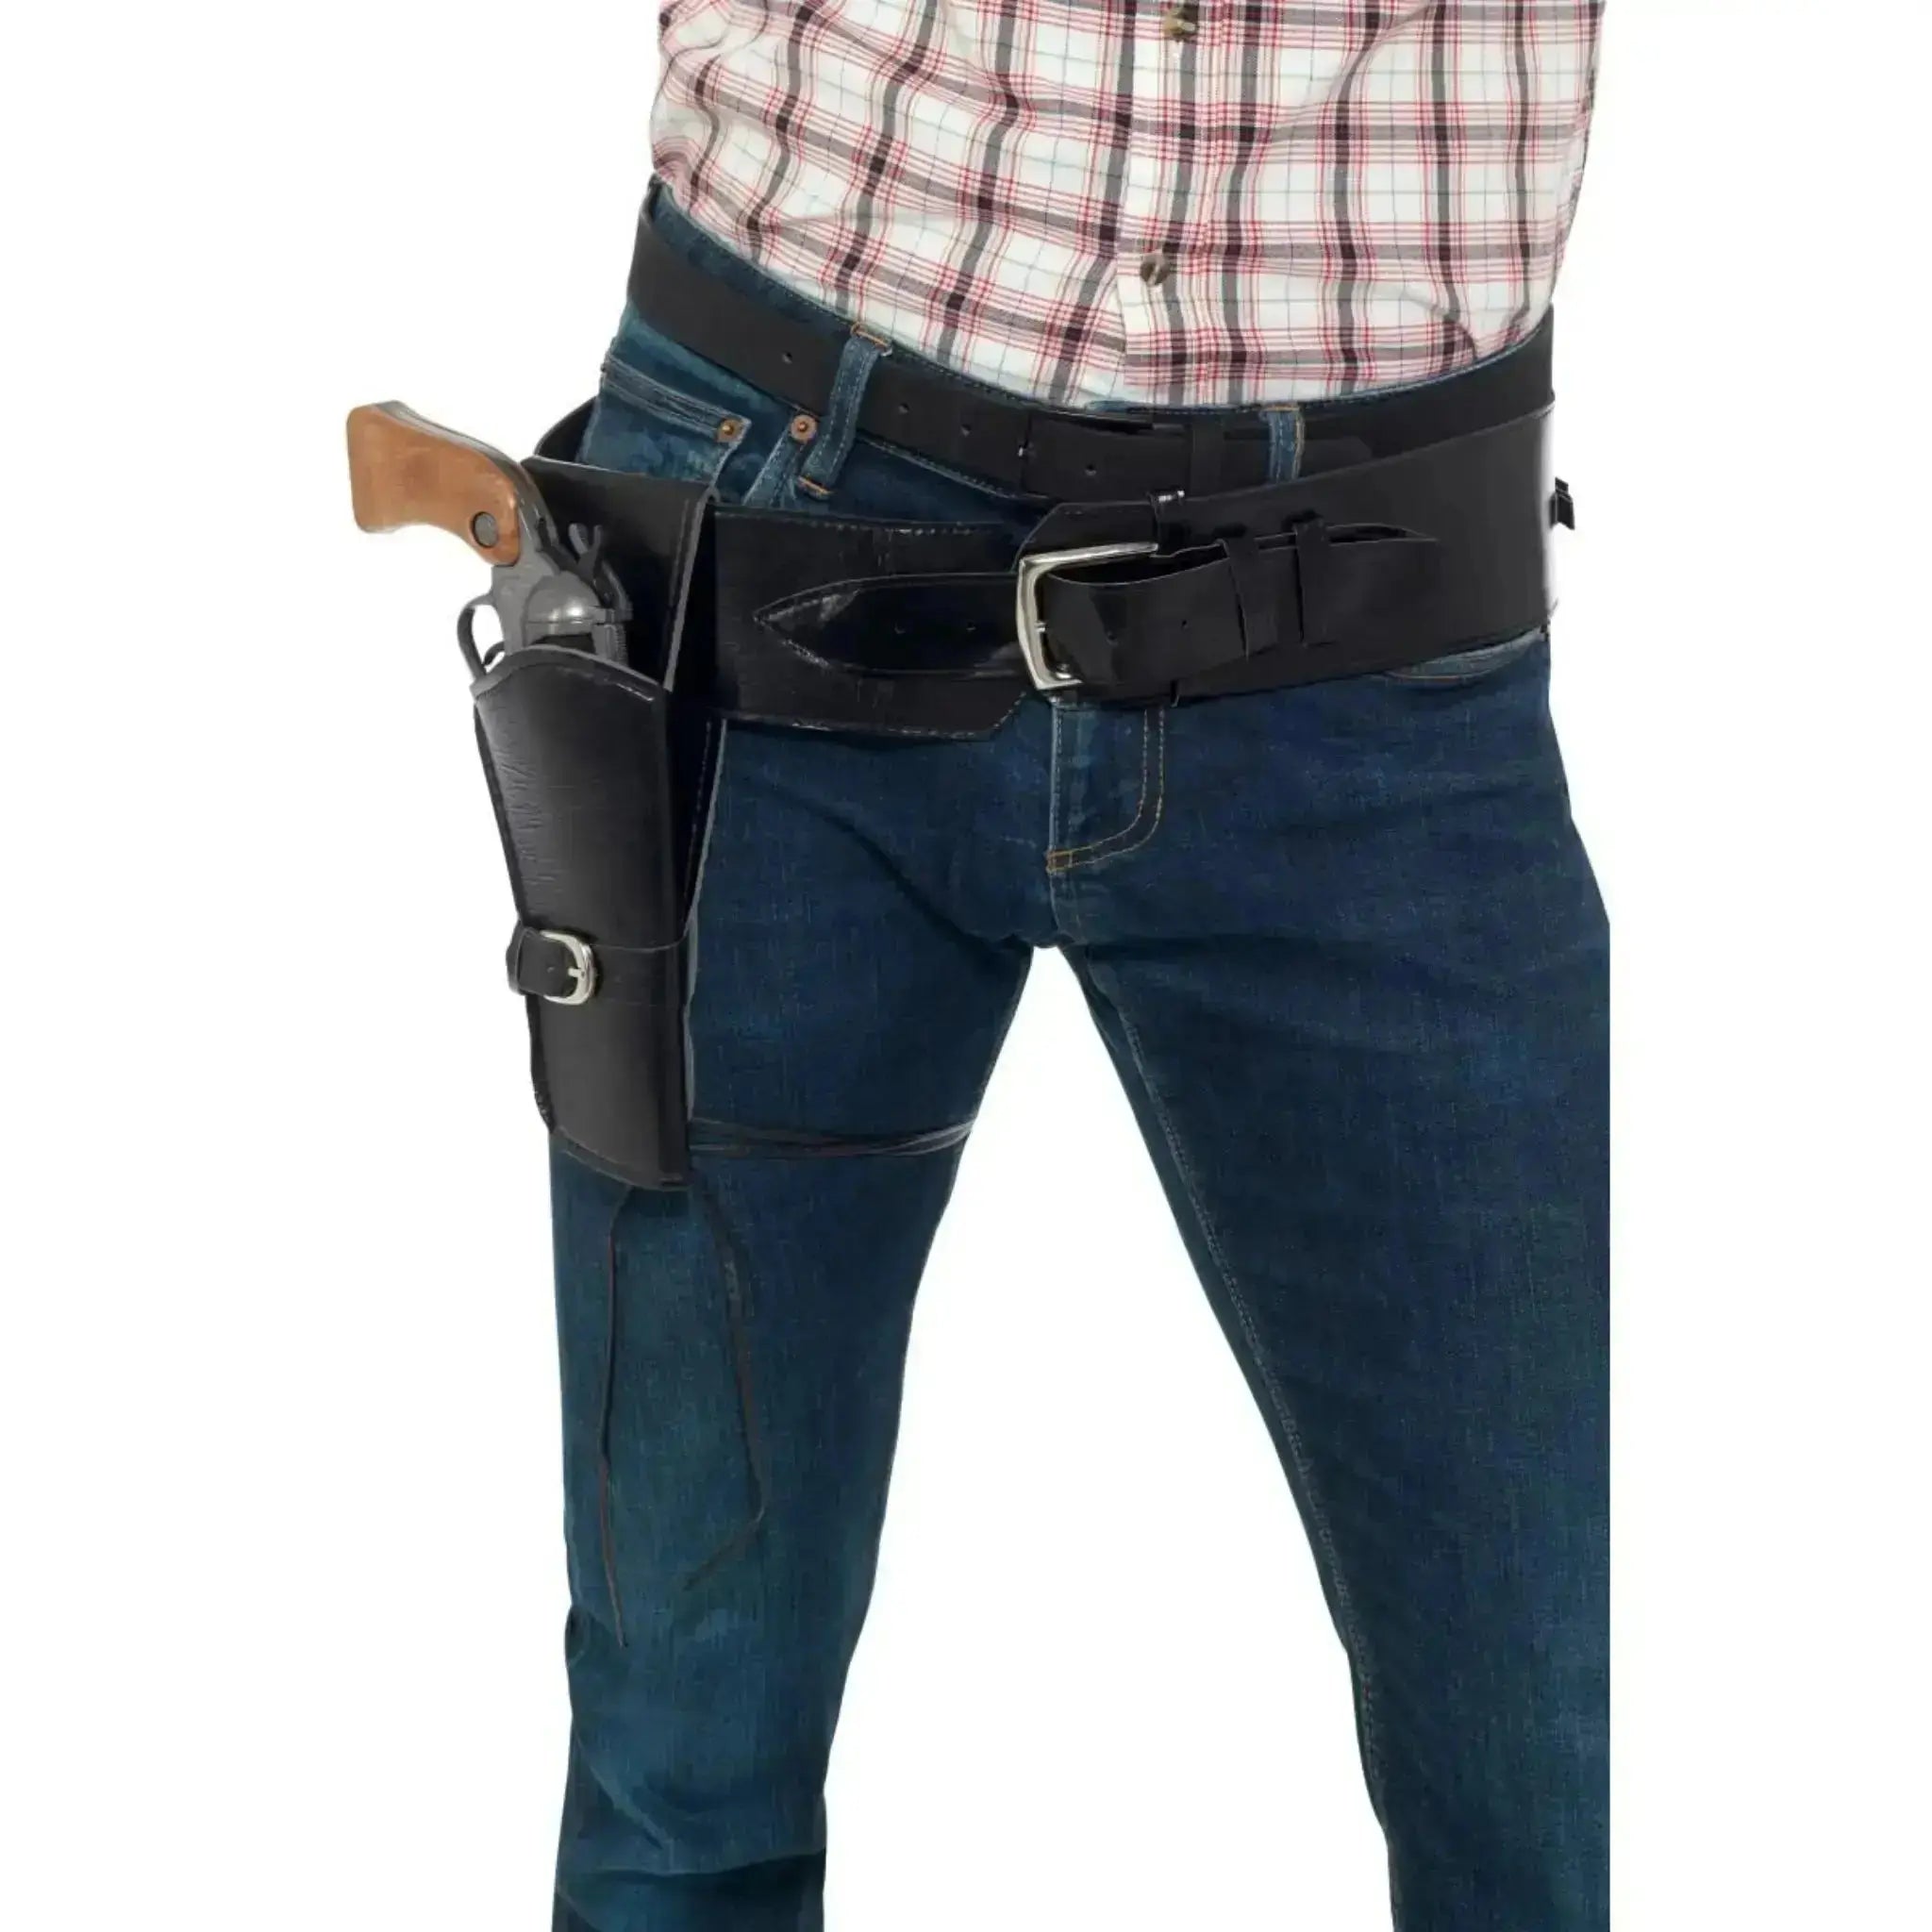 Cowboy Leather Holster | The Party Hut